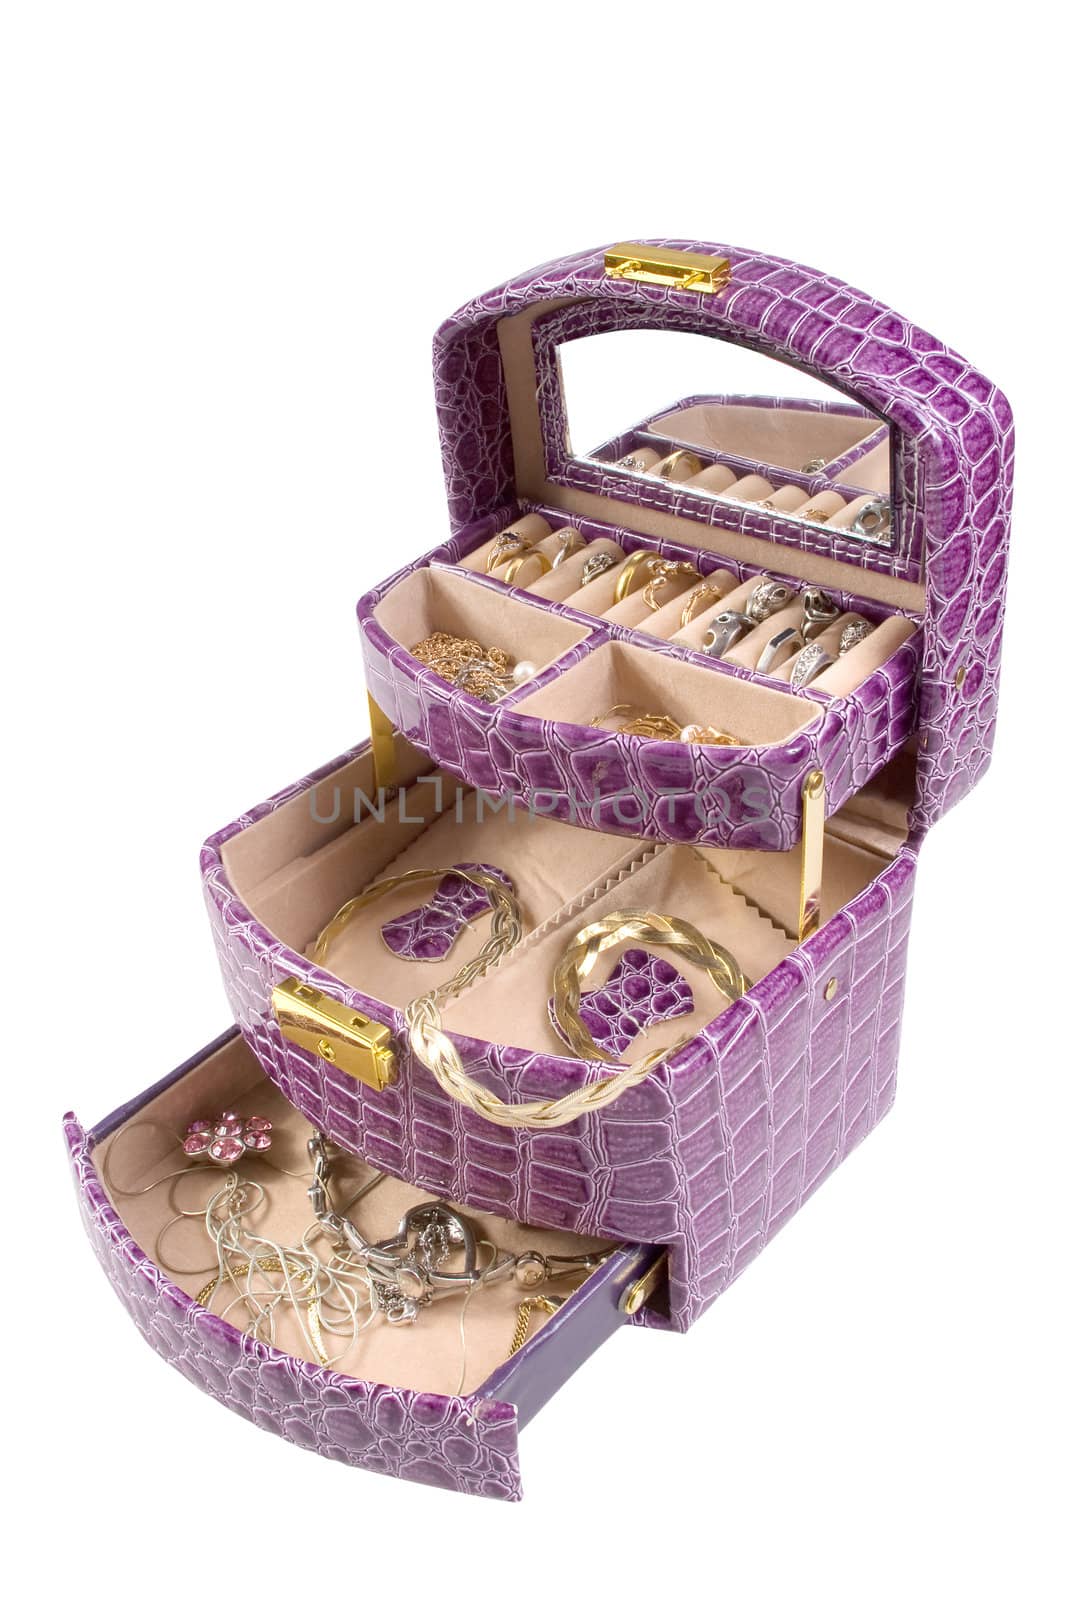 Lilac box with some jewelry